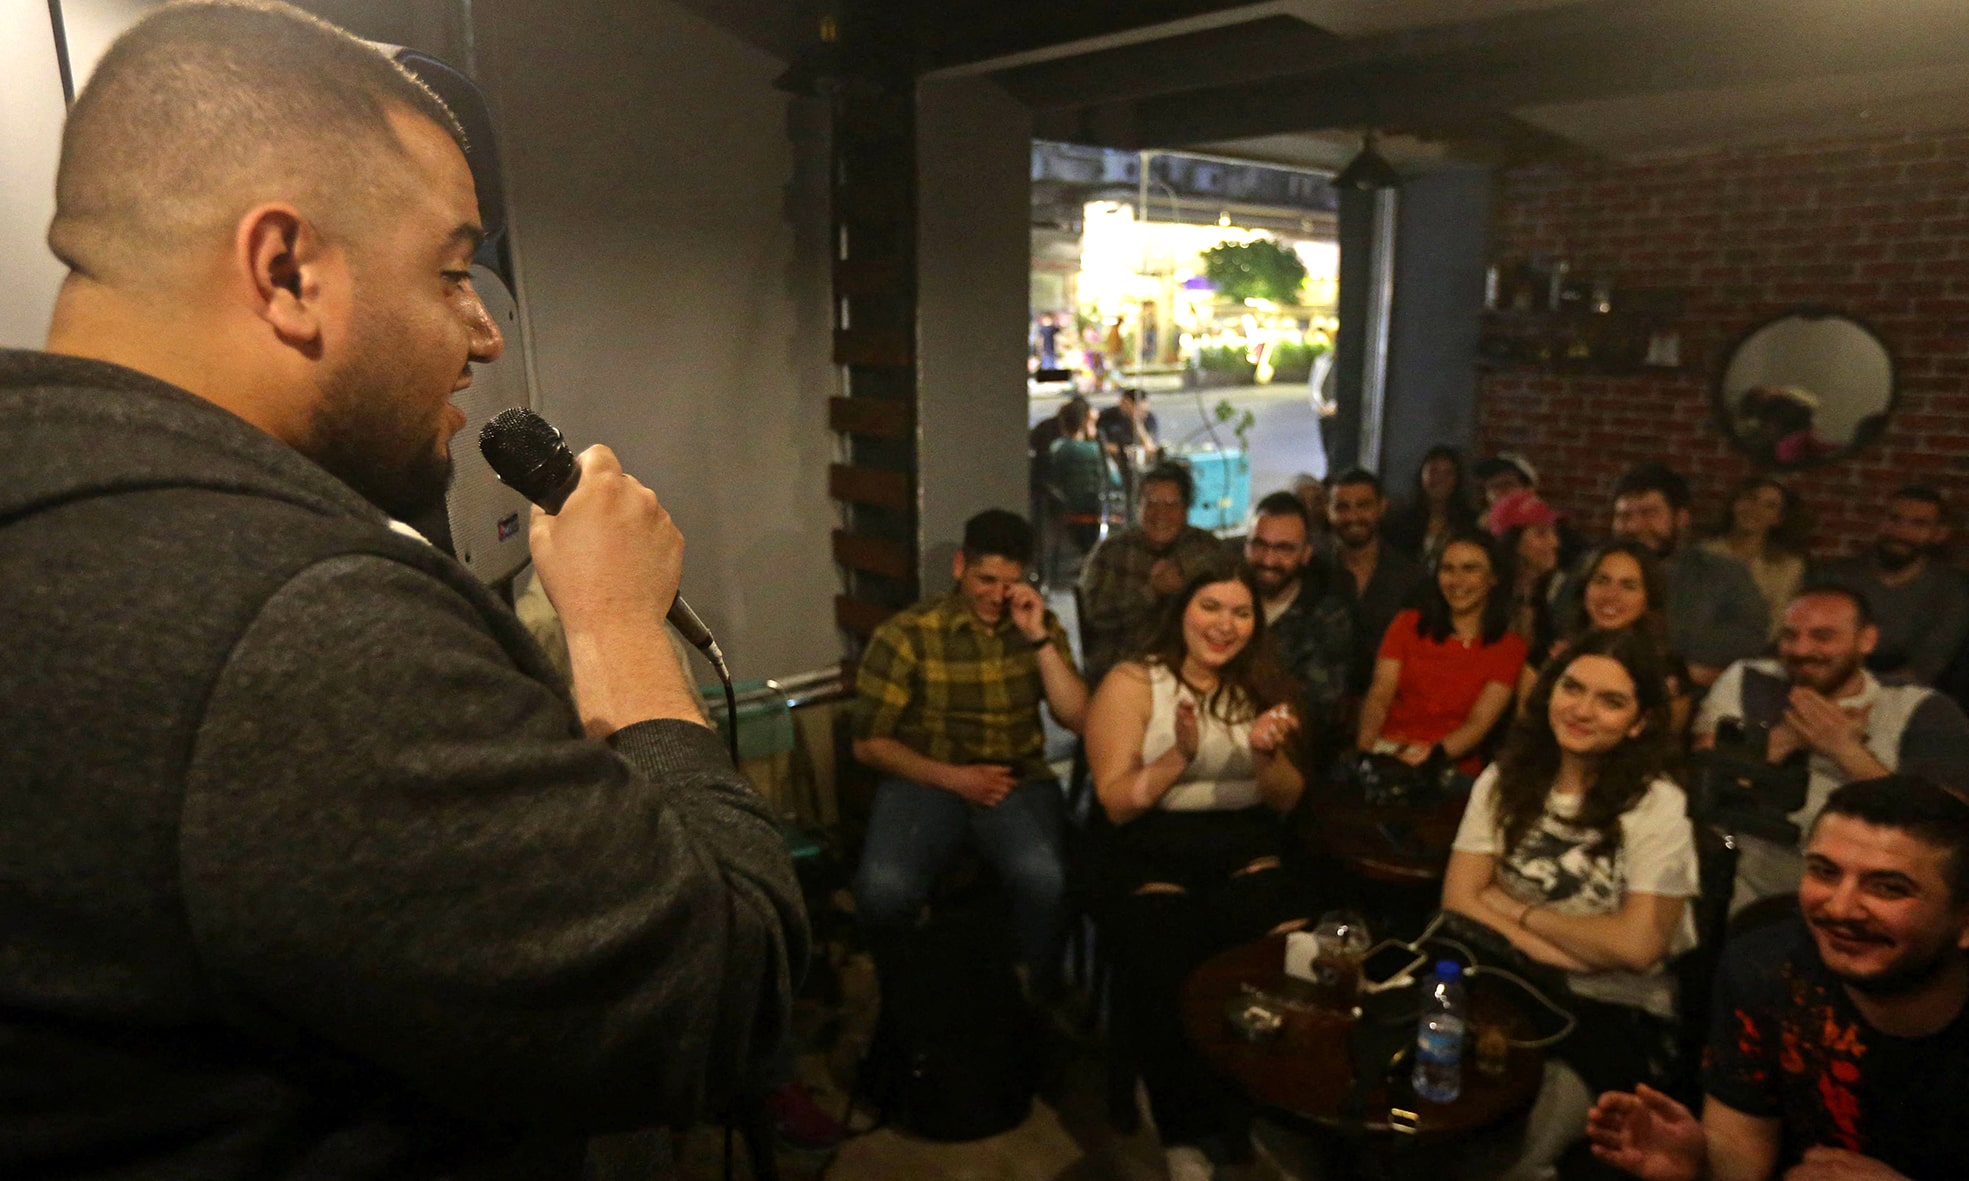 Hussein Al-Rawi performs during a comedy night titled 'Styria' which is an Arabic mash-up of Syria and hysteria, in Damascus.